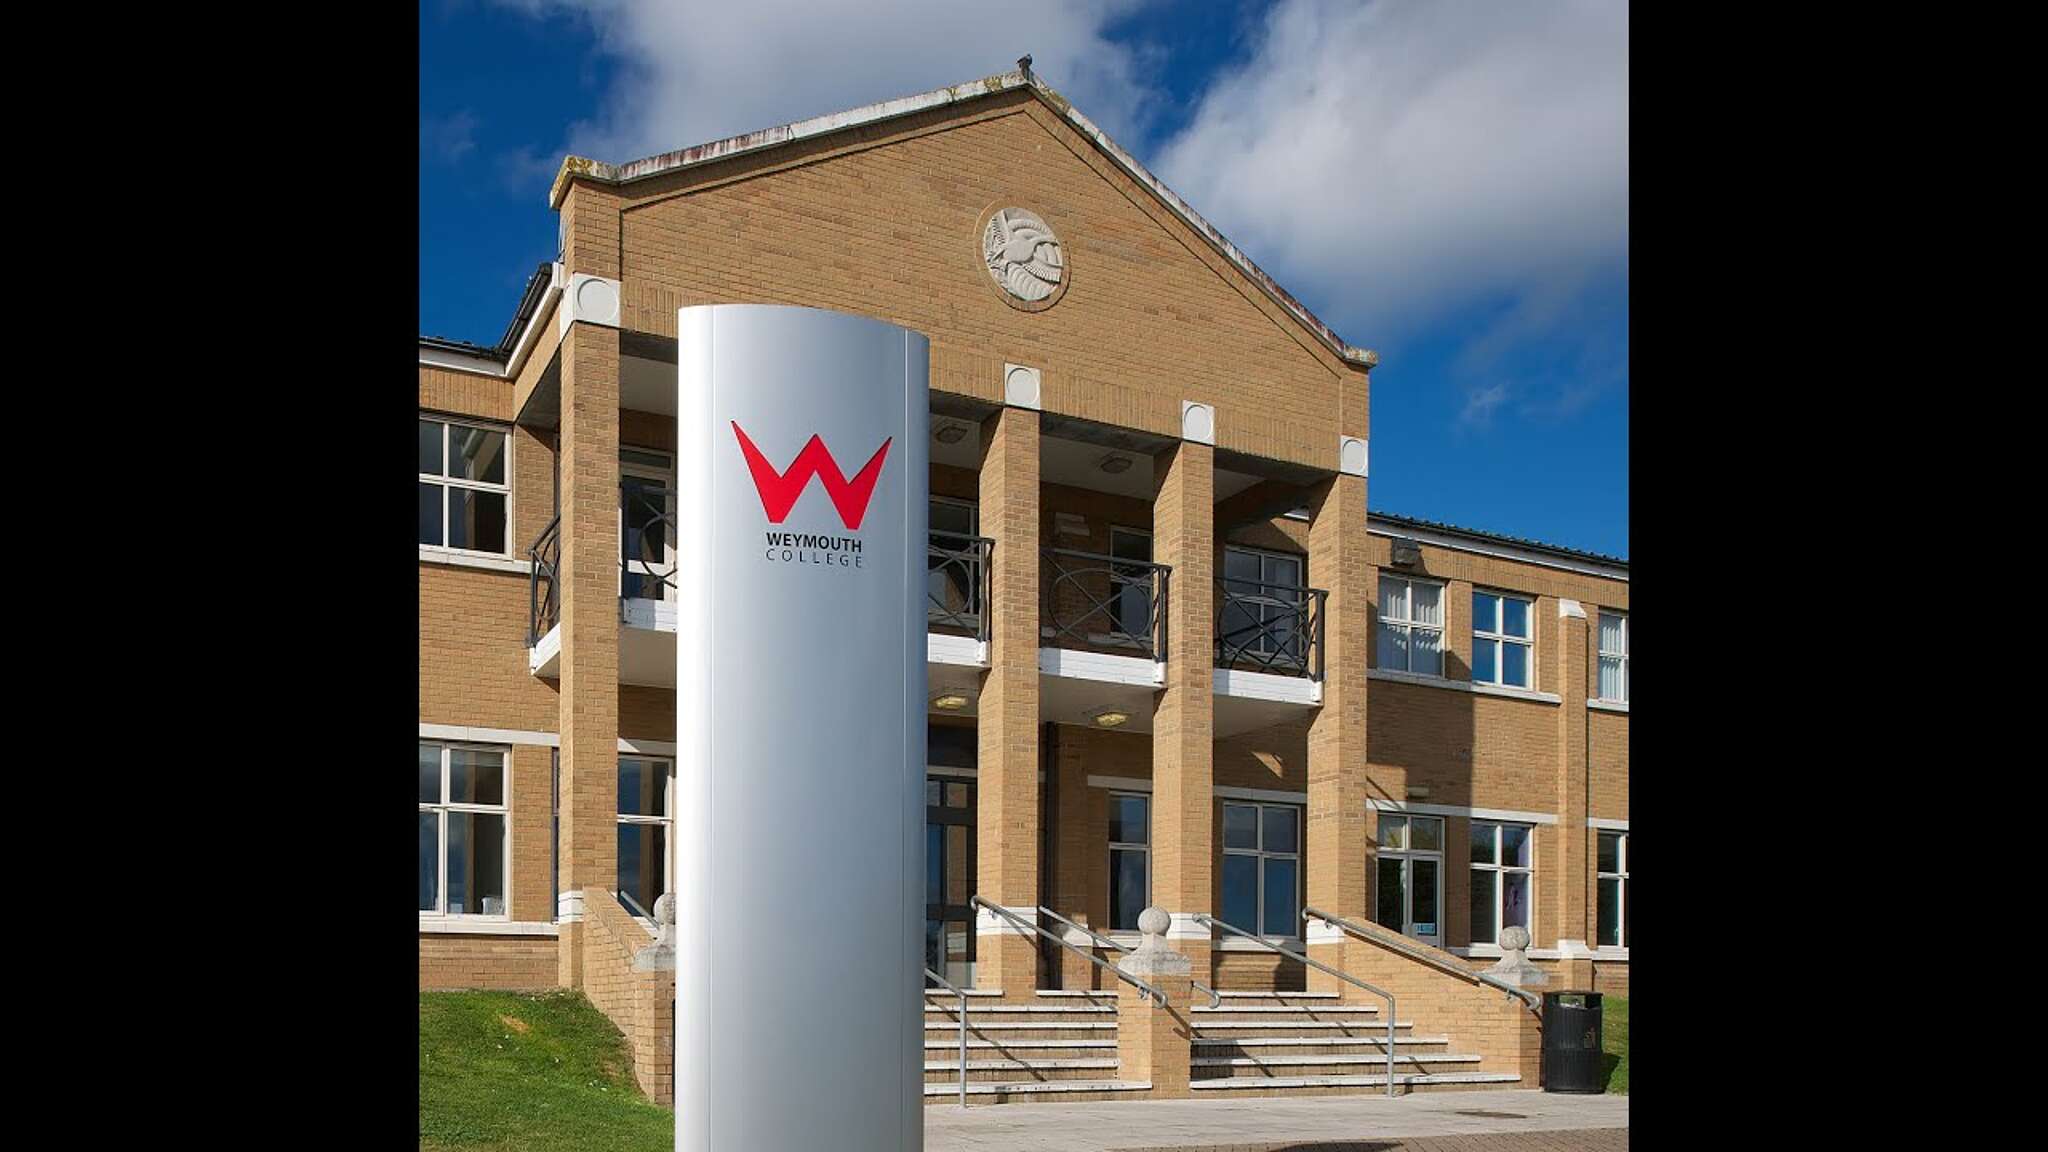 Weymouth College - A great place to study